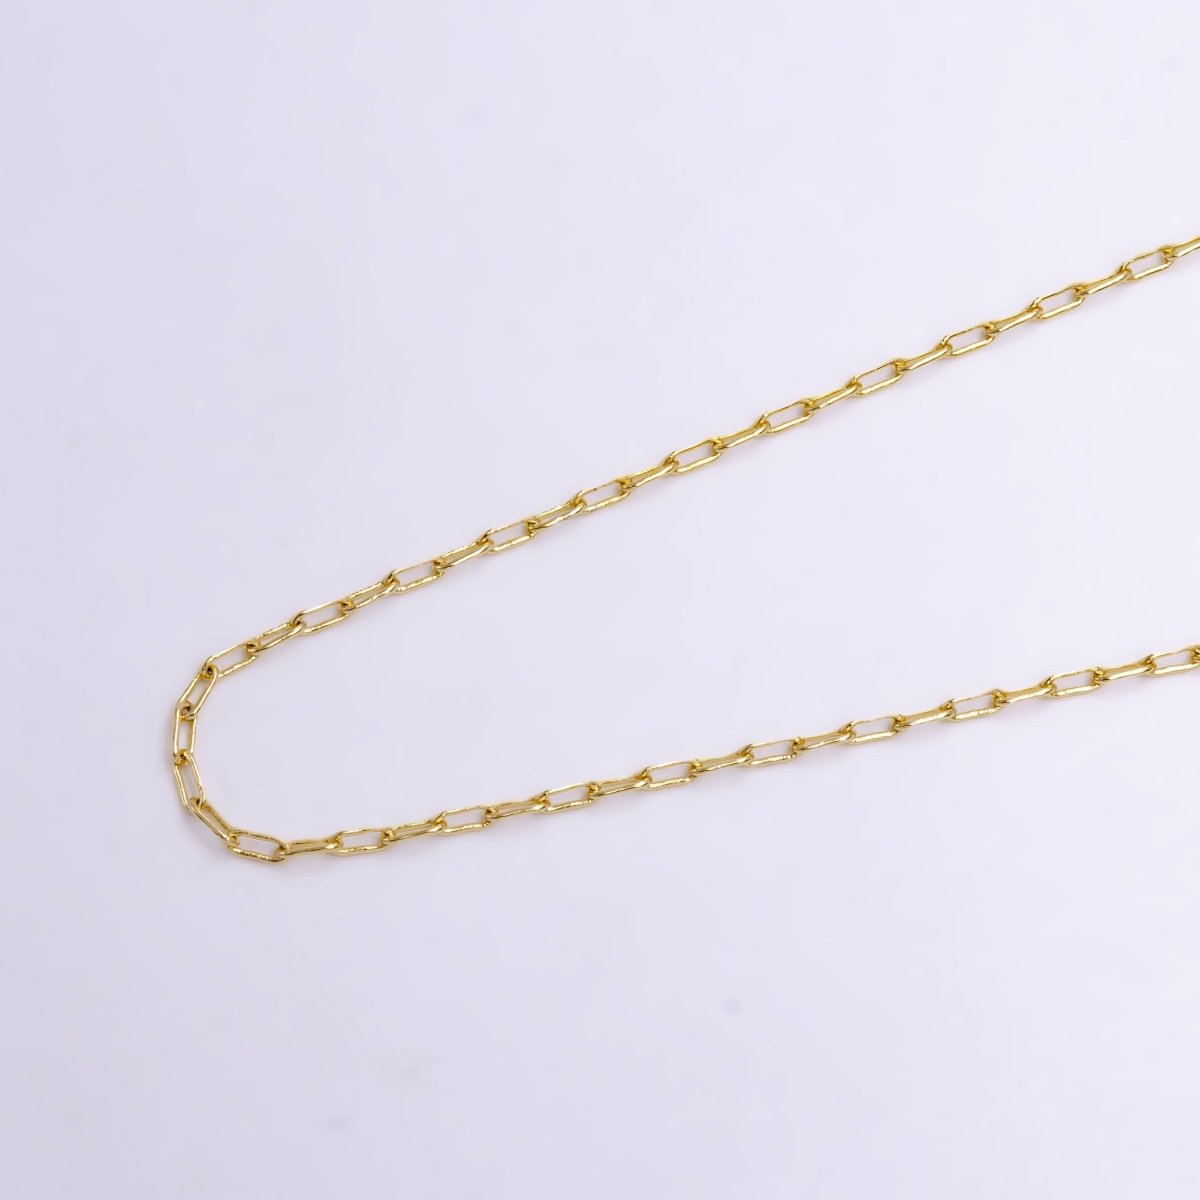 14K Gold Filled PaperClip Chain Necklace 17.8 inch Chain Minimalist Jewelry Ready to wear Necklace for Charm, 2mm w/ Lobster Clasps | CN-952 Clearance Pricing - DLUXCA